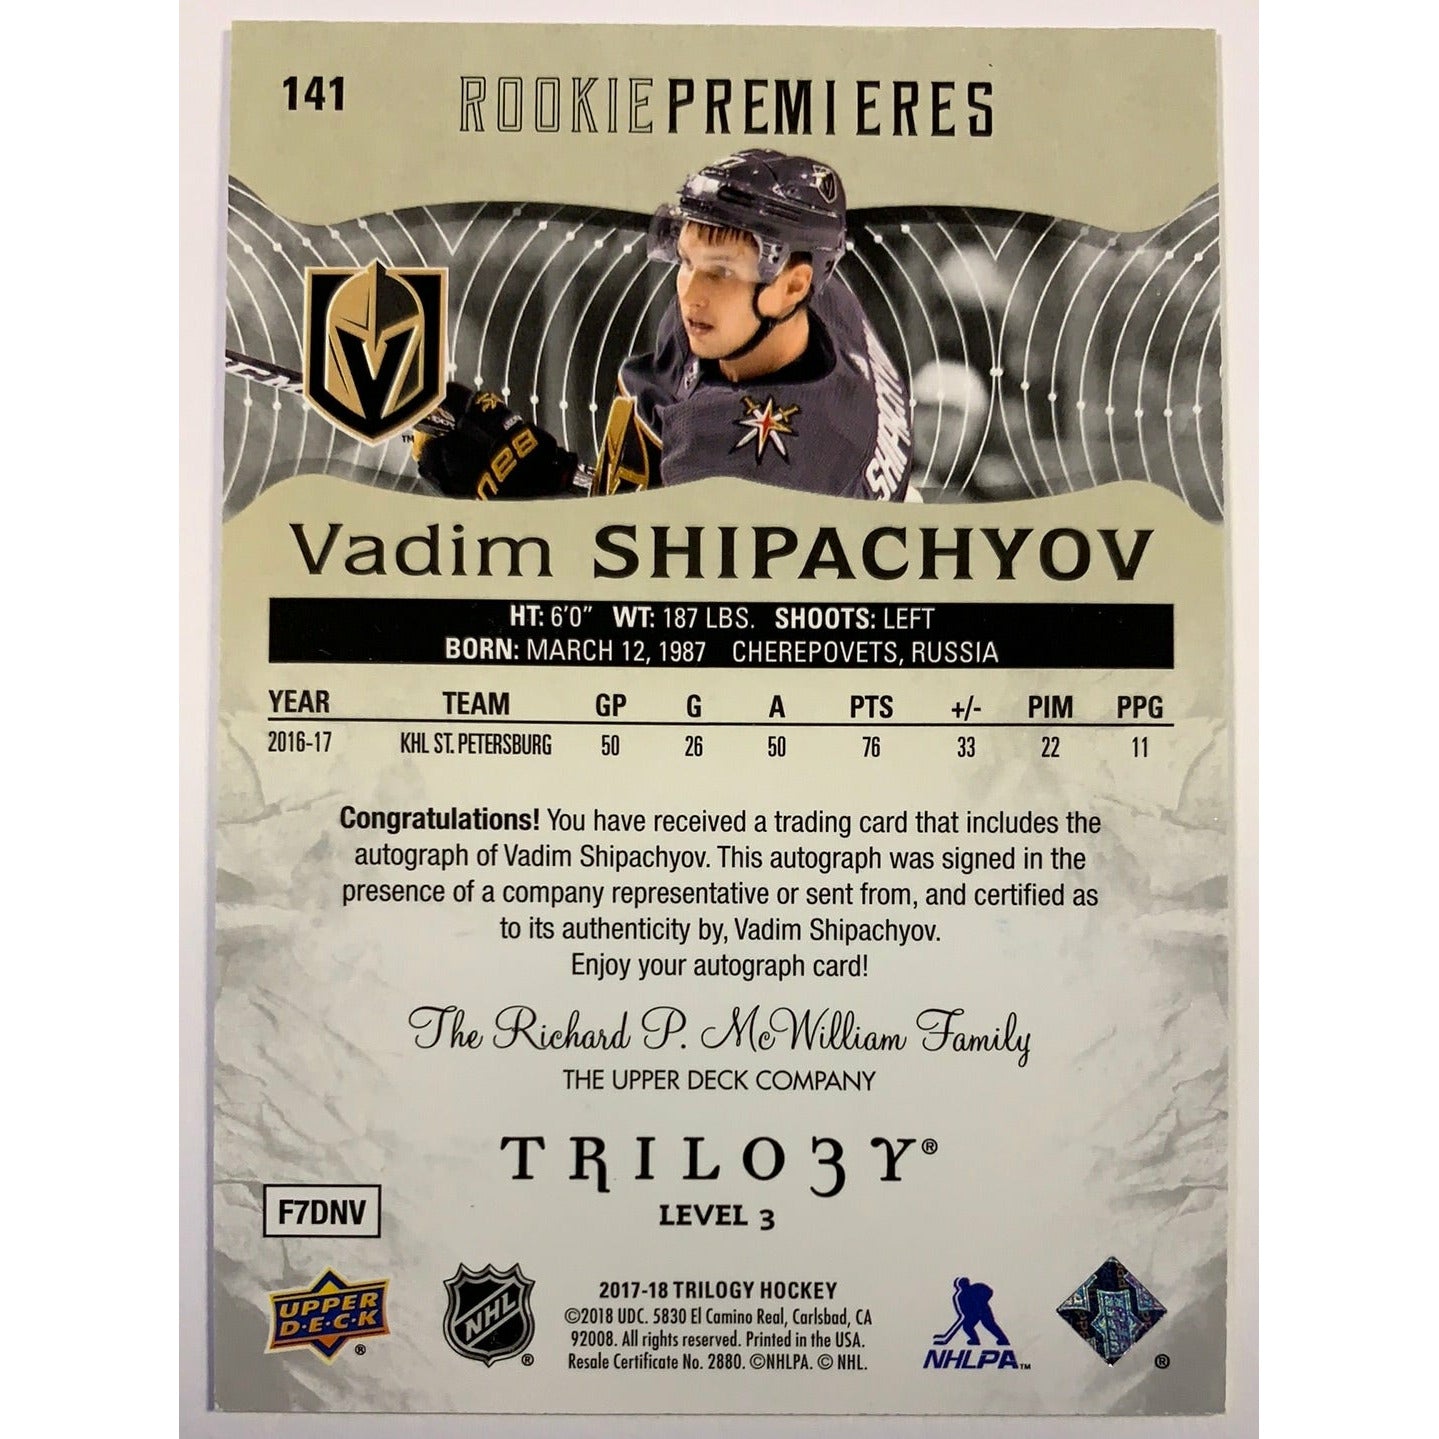 2017-18 Trilogy Level 3 Vadim Shipachyov Rookie Premiers Auto /49-Local Legends Cards & Collectibles